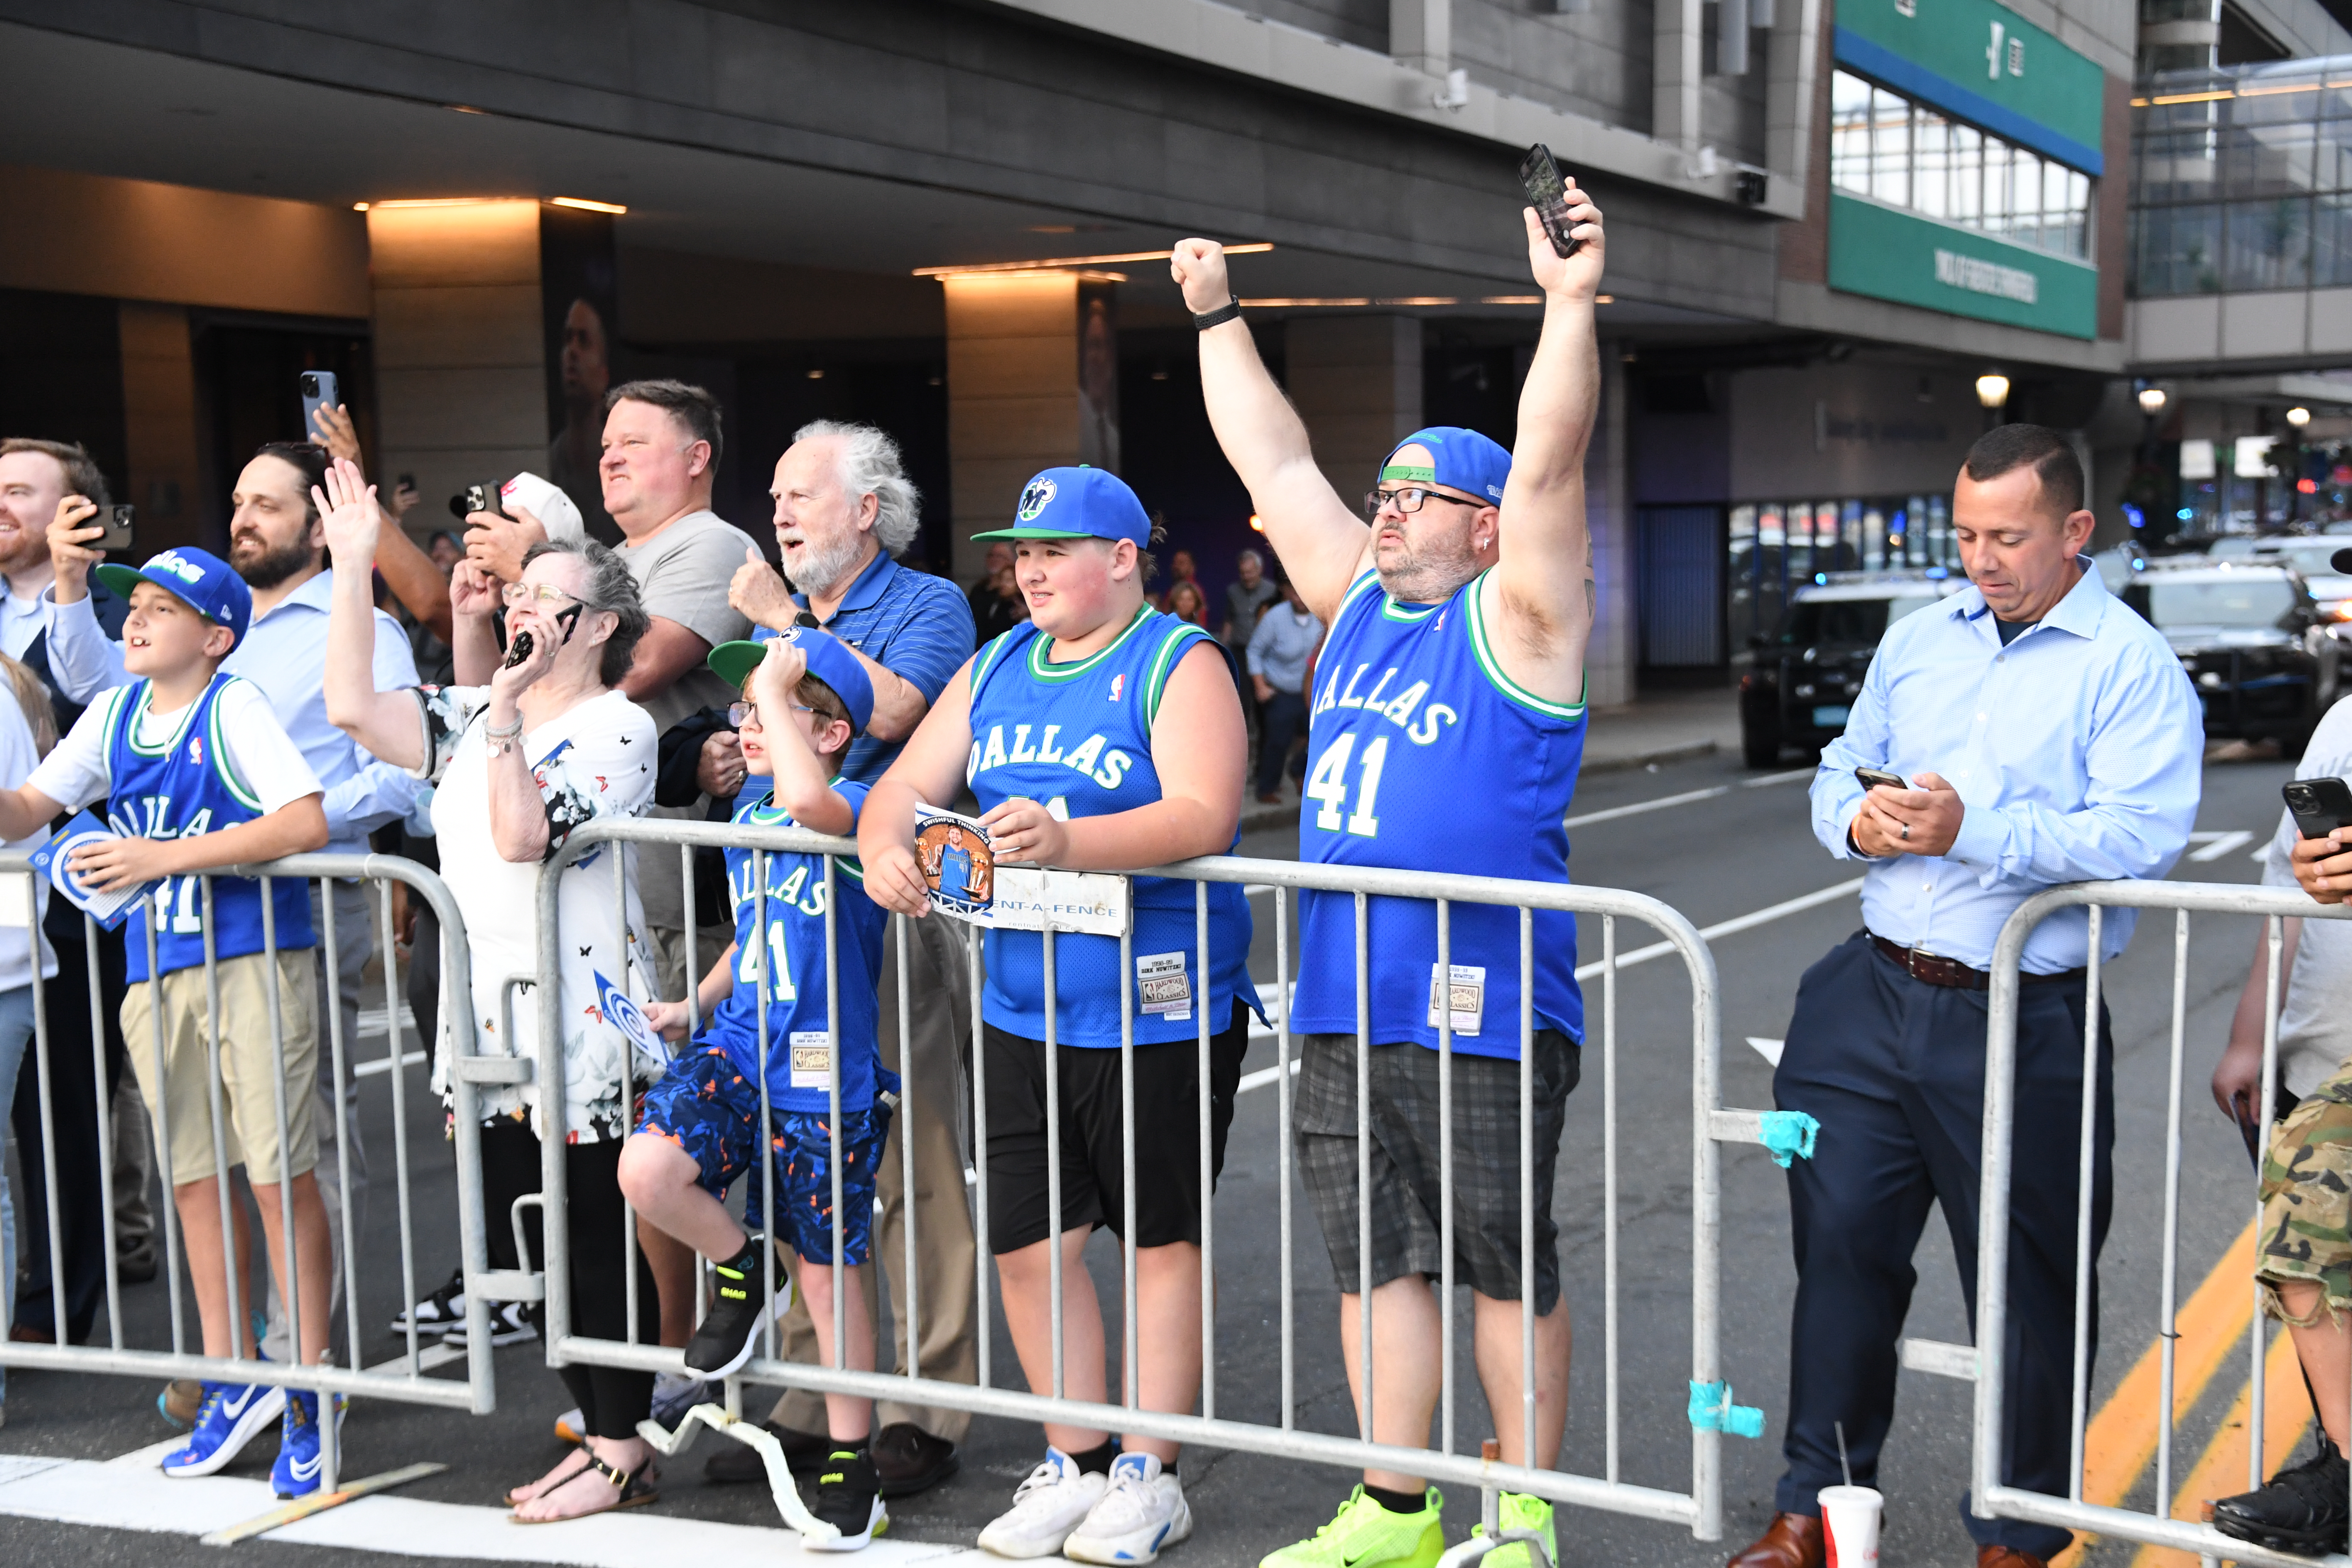 Dallas Mavericks fans look on during the 2023 Basketball Hall of Fame Enshrinement Ceremony on August 12, 2023 at Springfield Marriott in Springfield, Massachusetts.